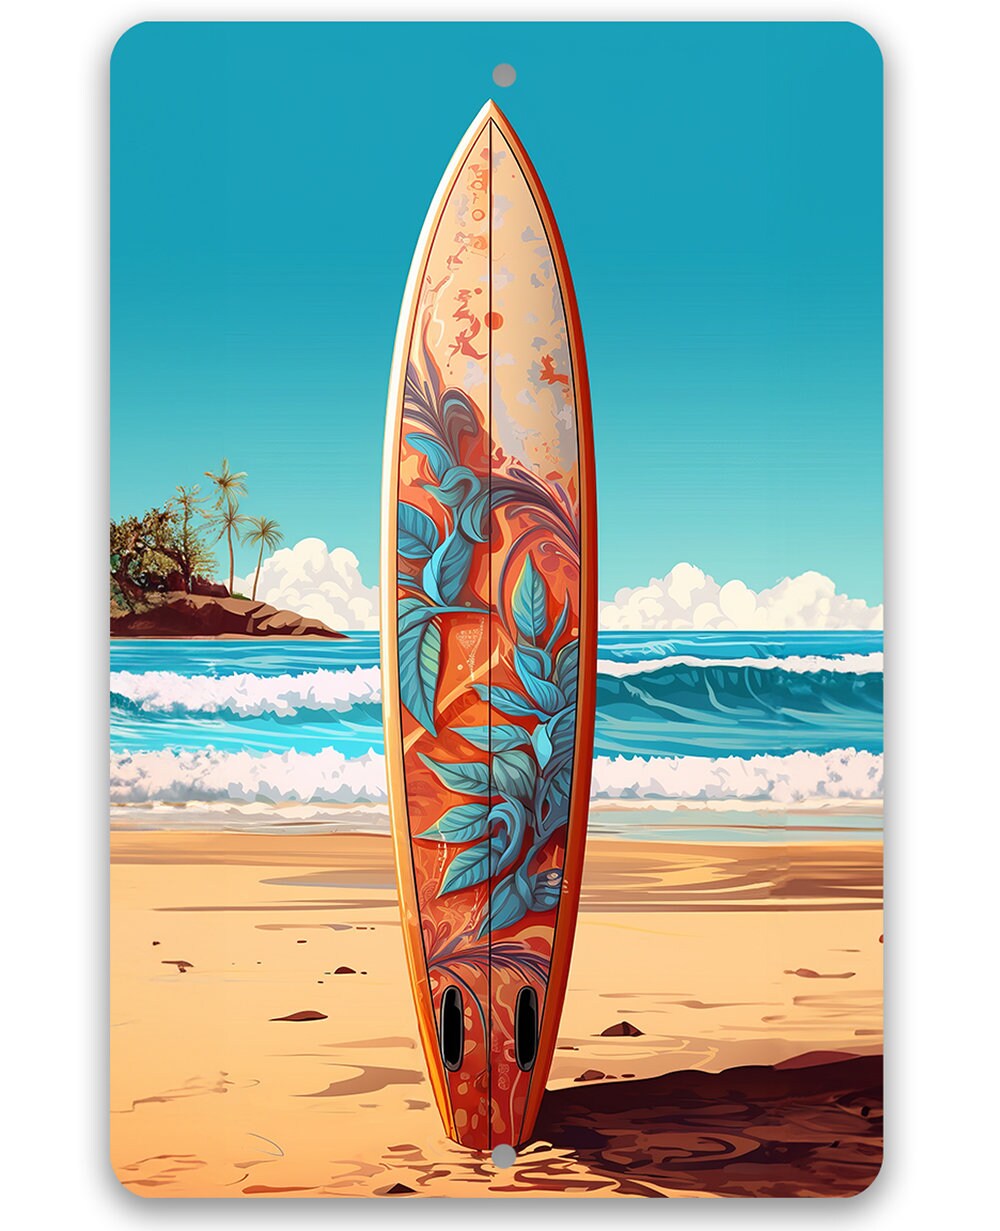 Tin - Surf's Up - Beach House and Summer Surfing Decor - Durable Metal Sign - 8" x 12" or 12" x 18" Aluminum Awesome Metal Poster